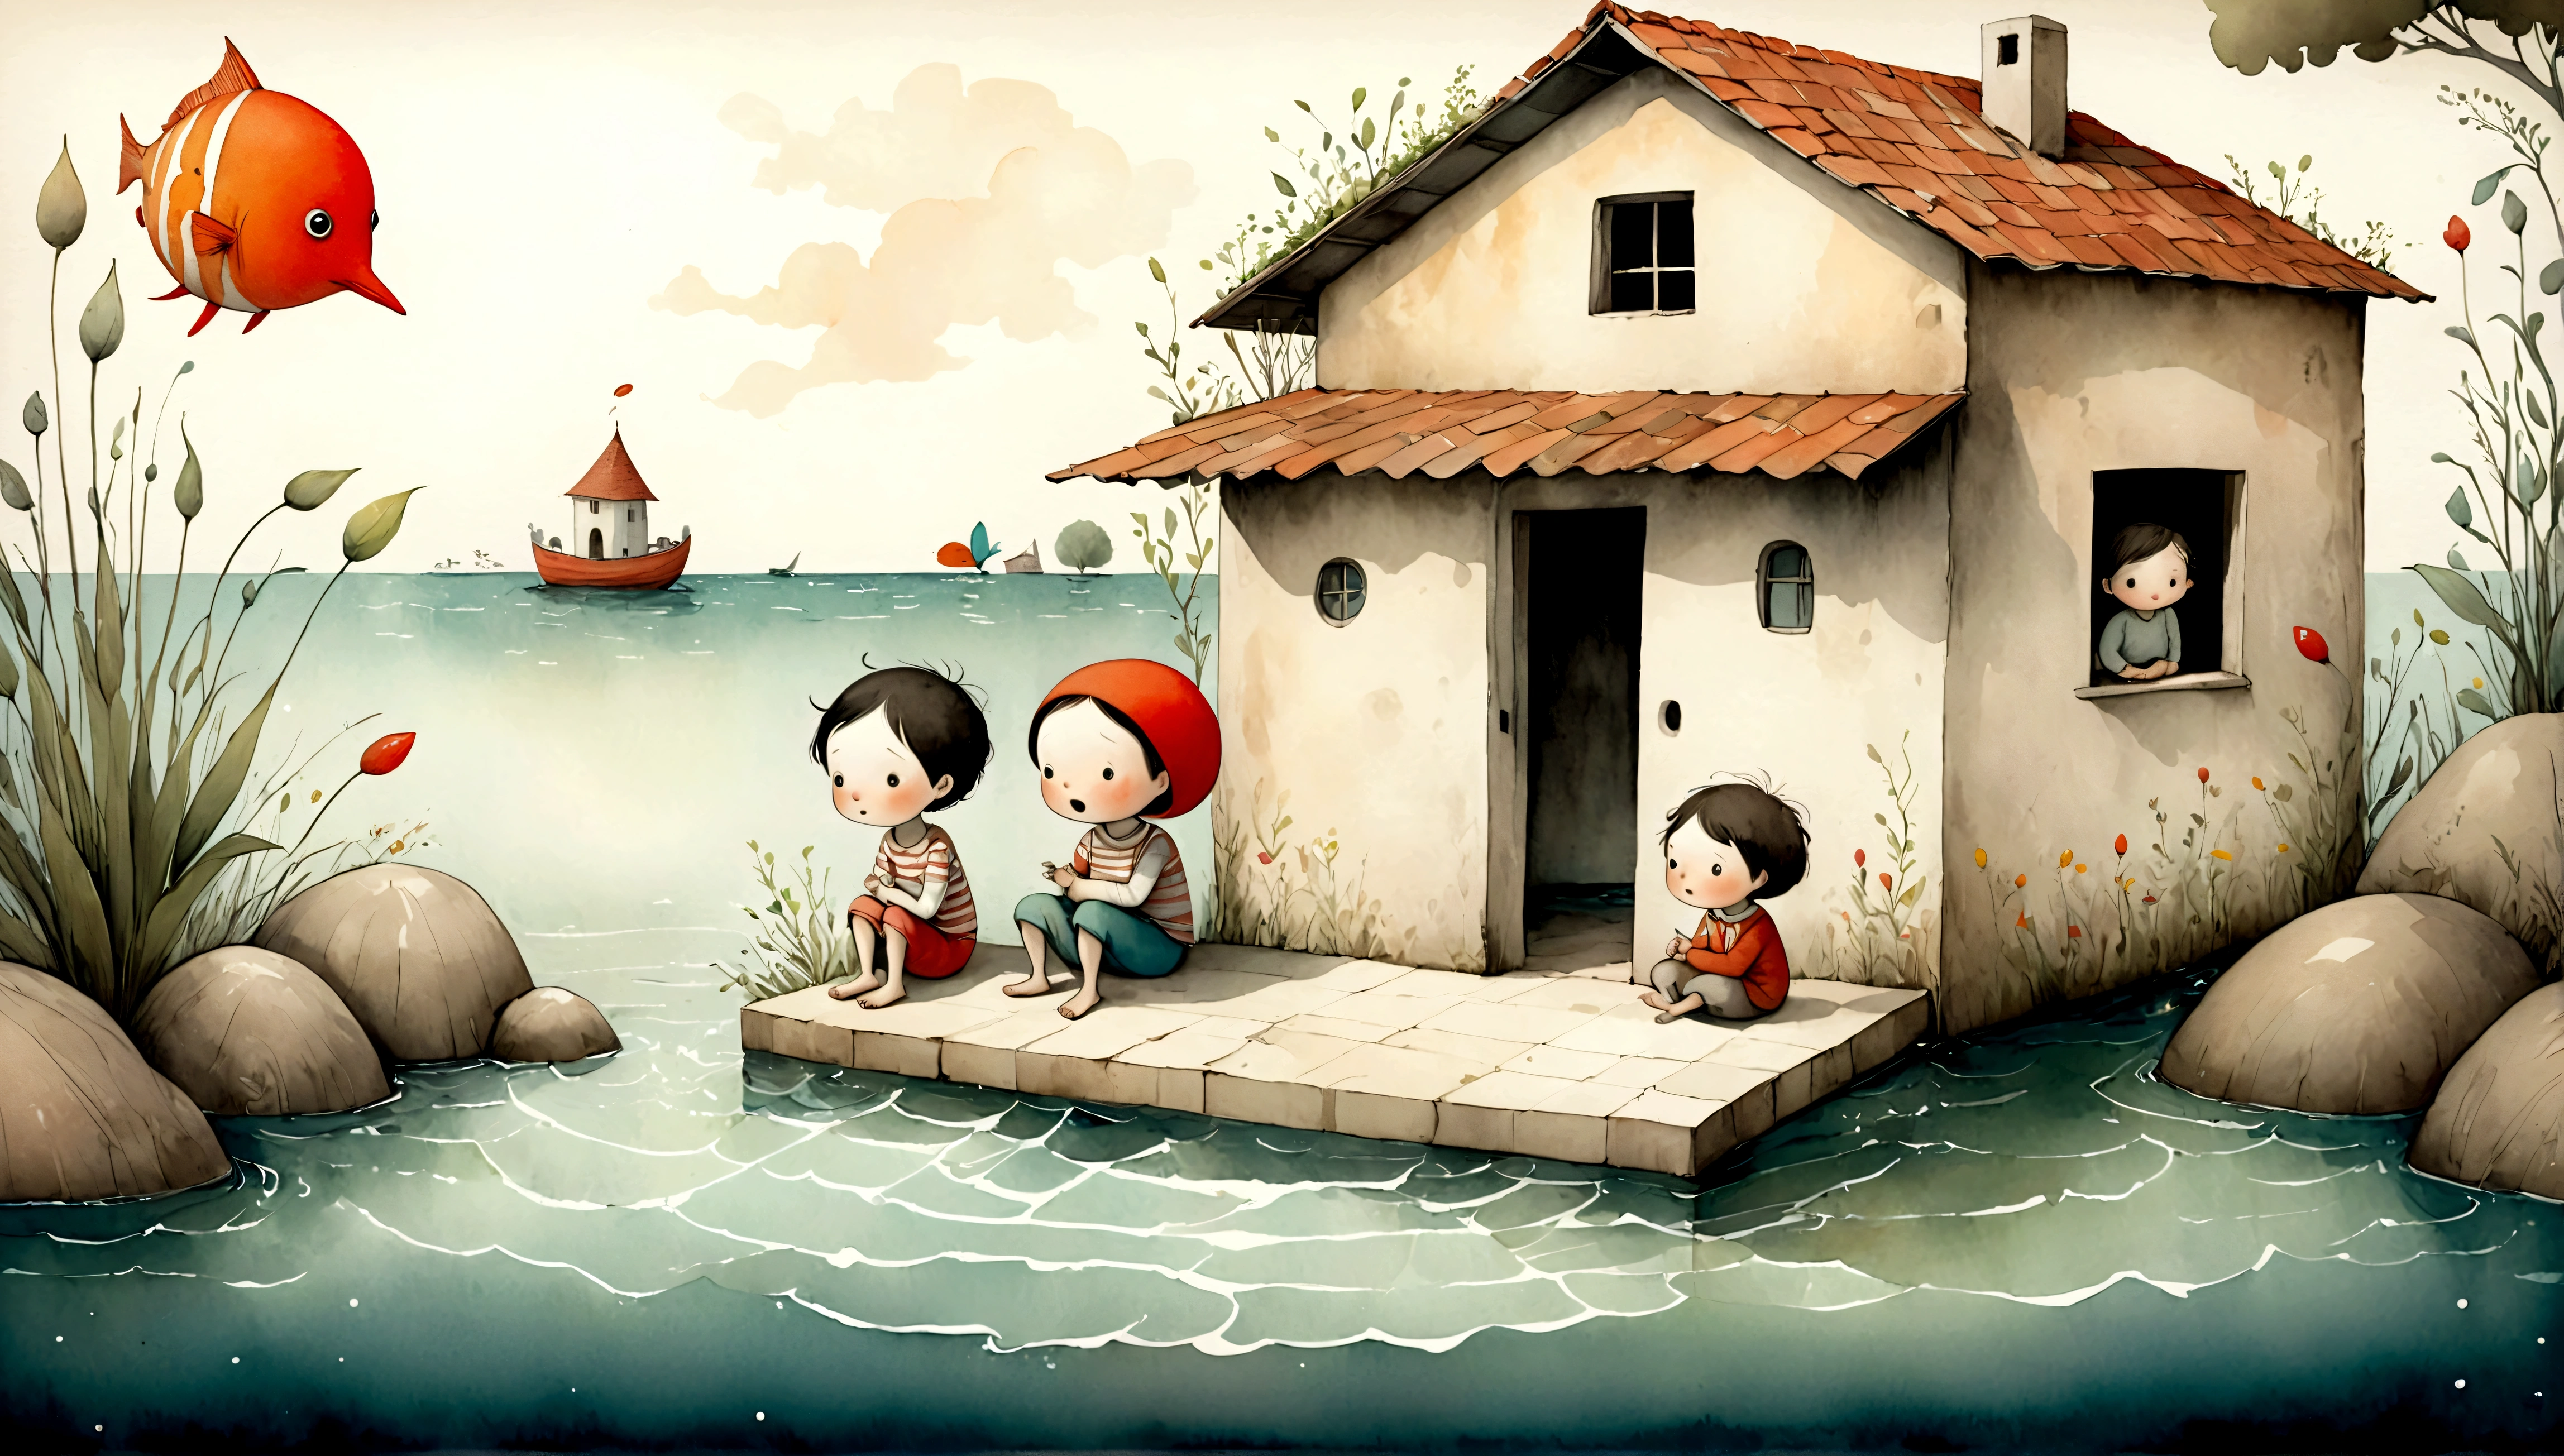 An illustration,Draw children with surprised expressions,This is a scene where we were fully prepared to play in the sea, but the event was canceled.,Children have floats in their hands,Children with open mouths and disappointed expressions,Some children sat down in shock.,children are wearing summer clothes,(The background is the garden of a house),cute illustration,surreal,artwork,Expressively,This is an illustration that looks like a picture book illustration.,draw with thick lines,Please draw with a gentle touch,Draw with pencil and watercolors,Gabriel Pacheco Style page